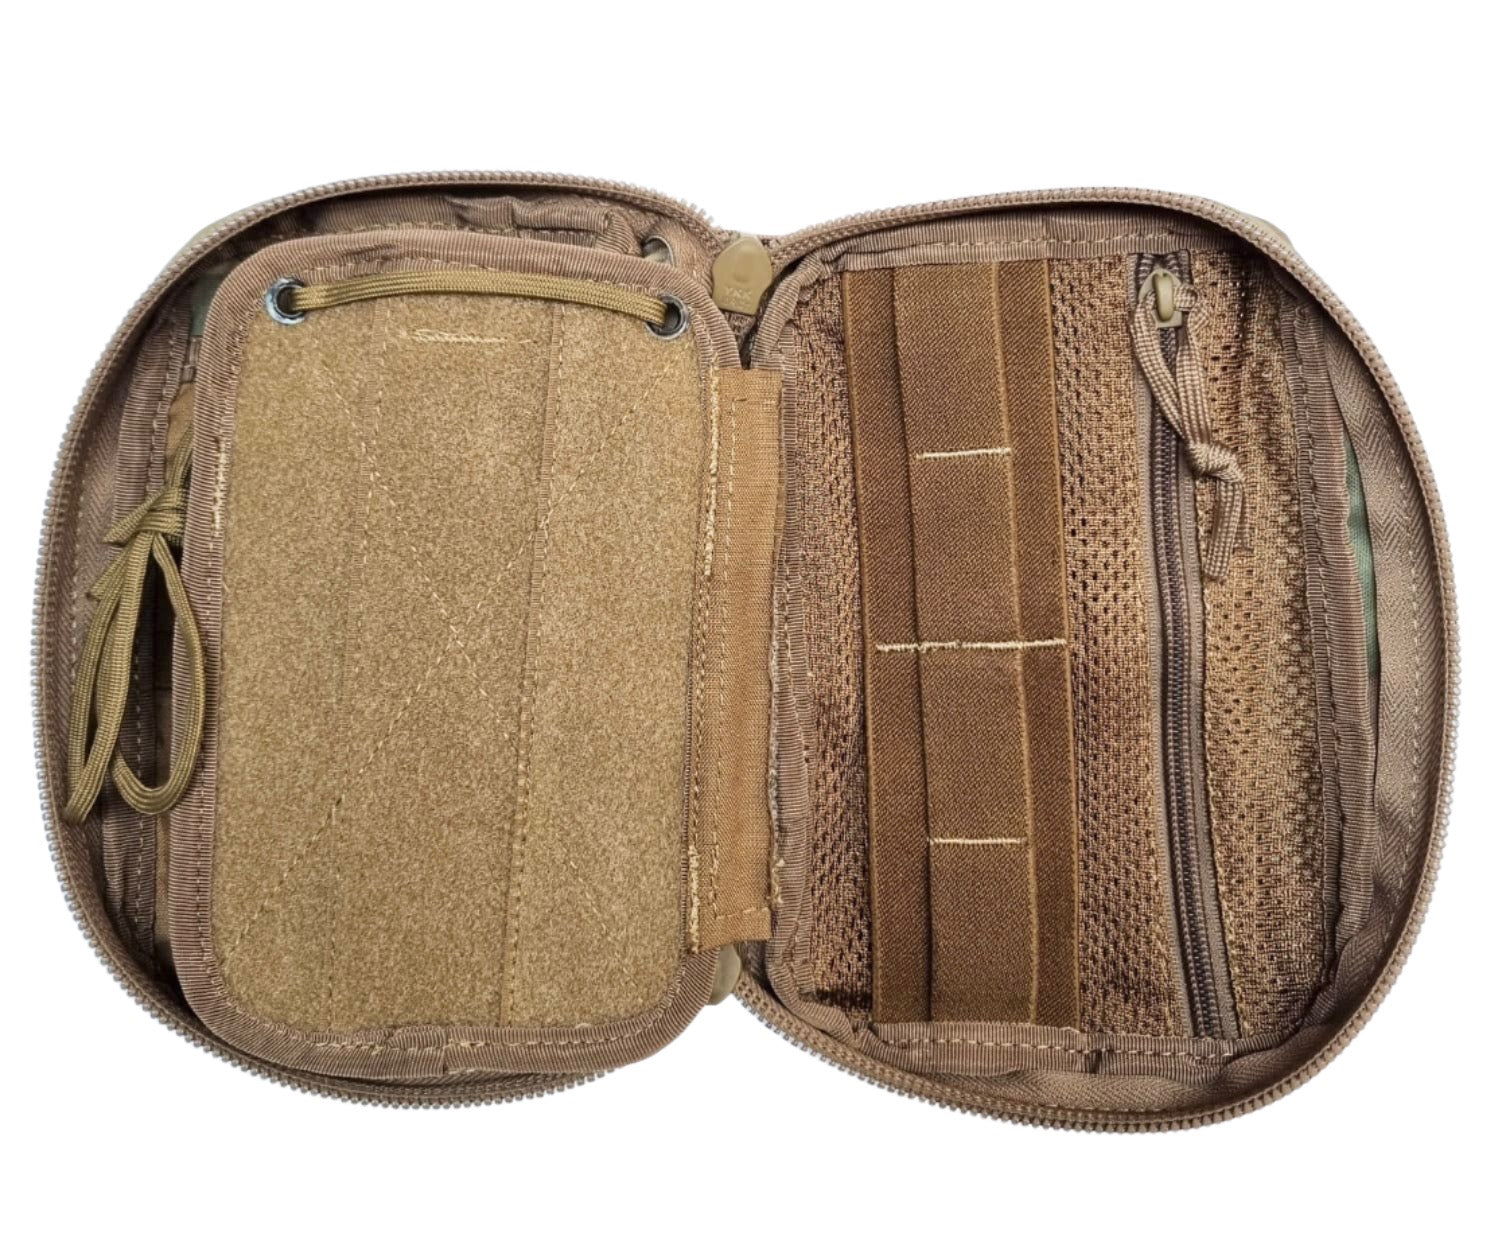 Shadow Strategic Compact EDC Camouflage  Pouch Colour Multicam inside view.